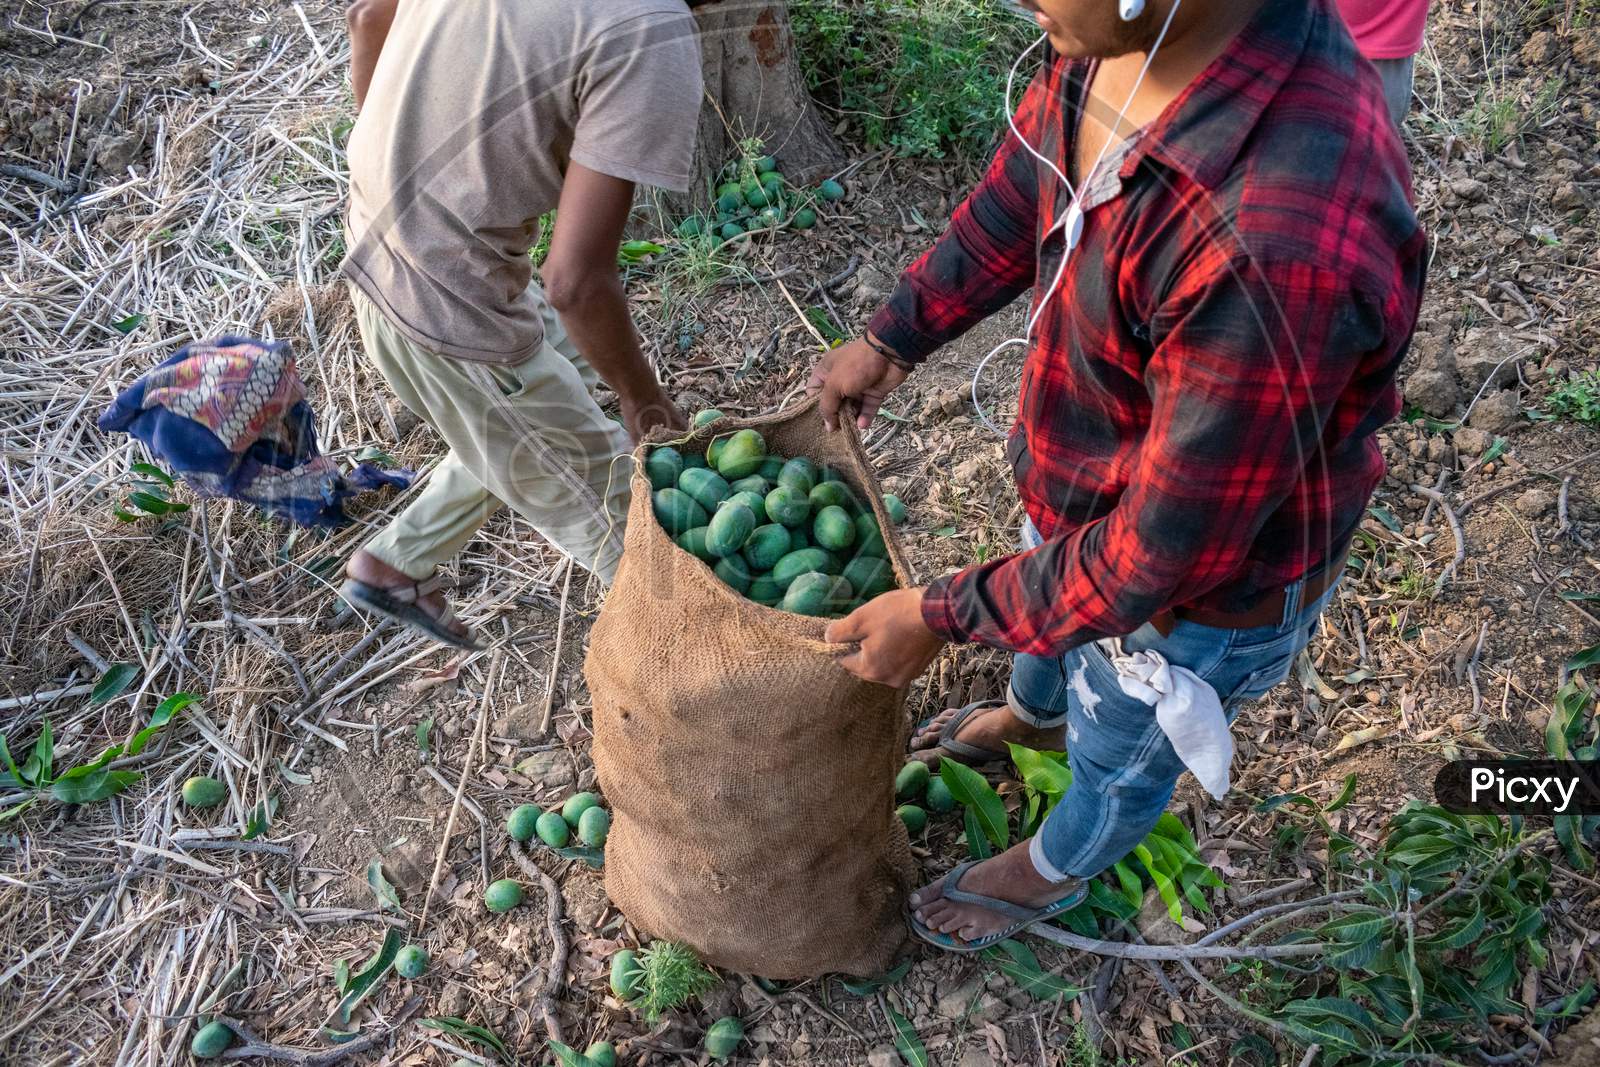 Packaging of fresh green raw mangoes in a jute bag at a farm